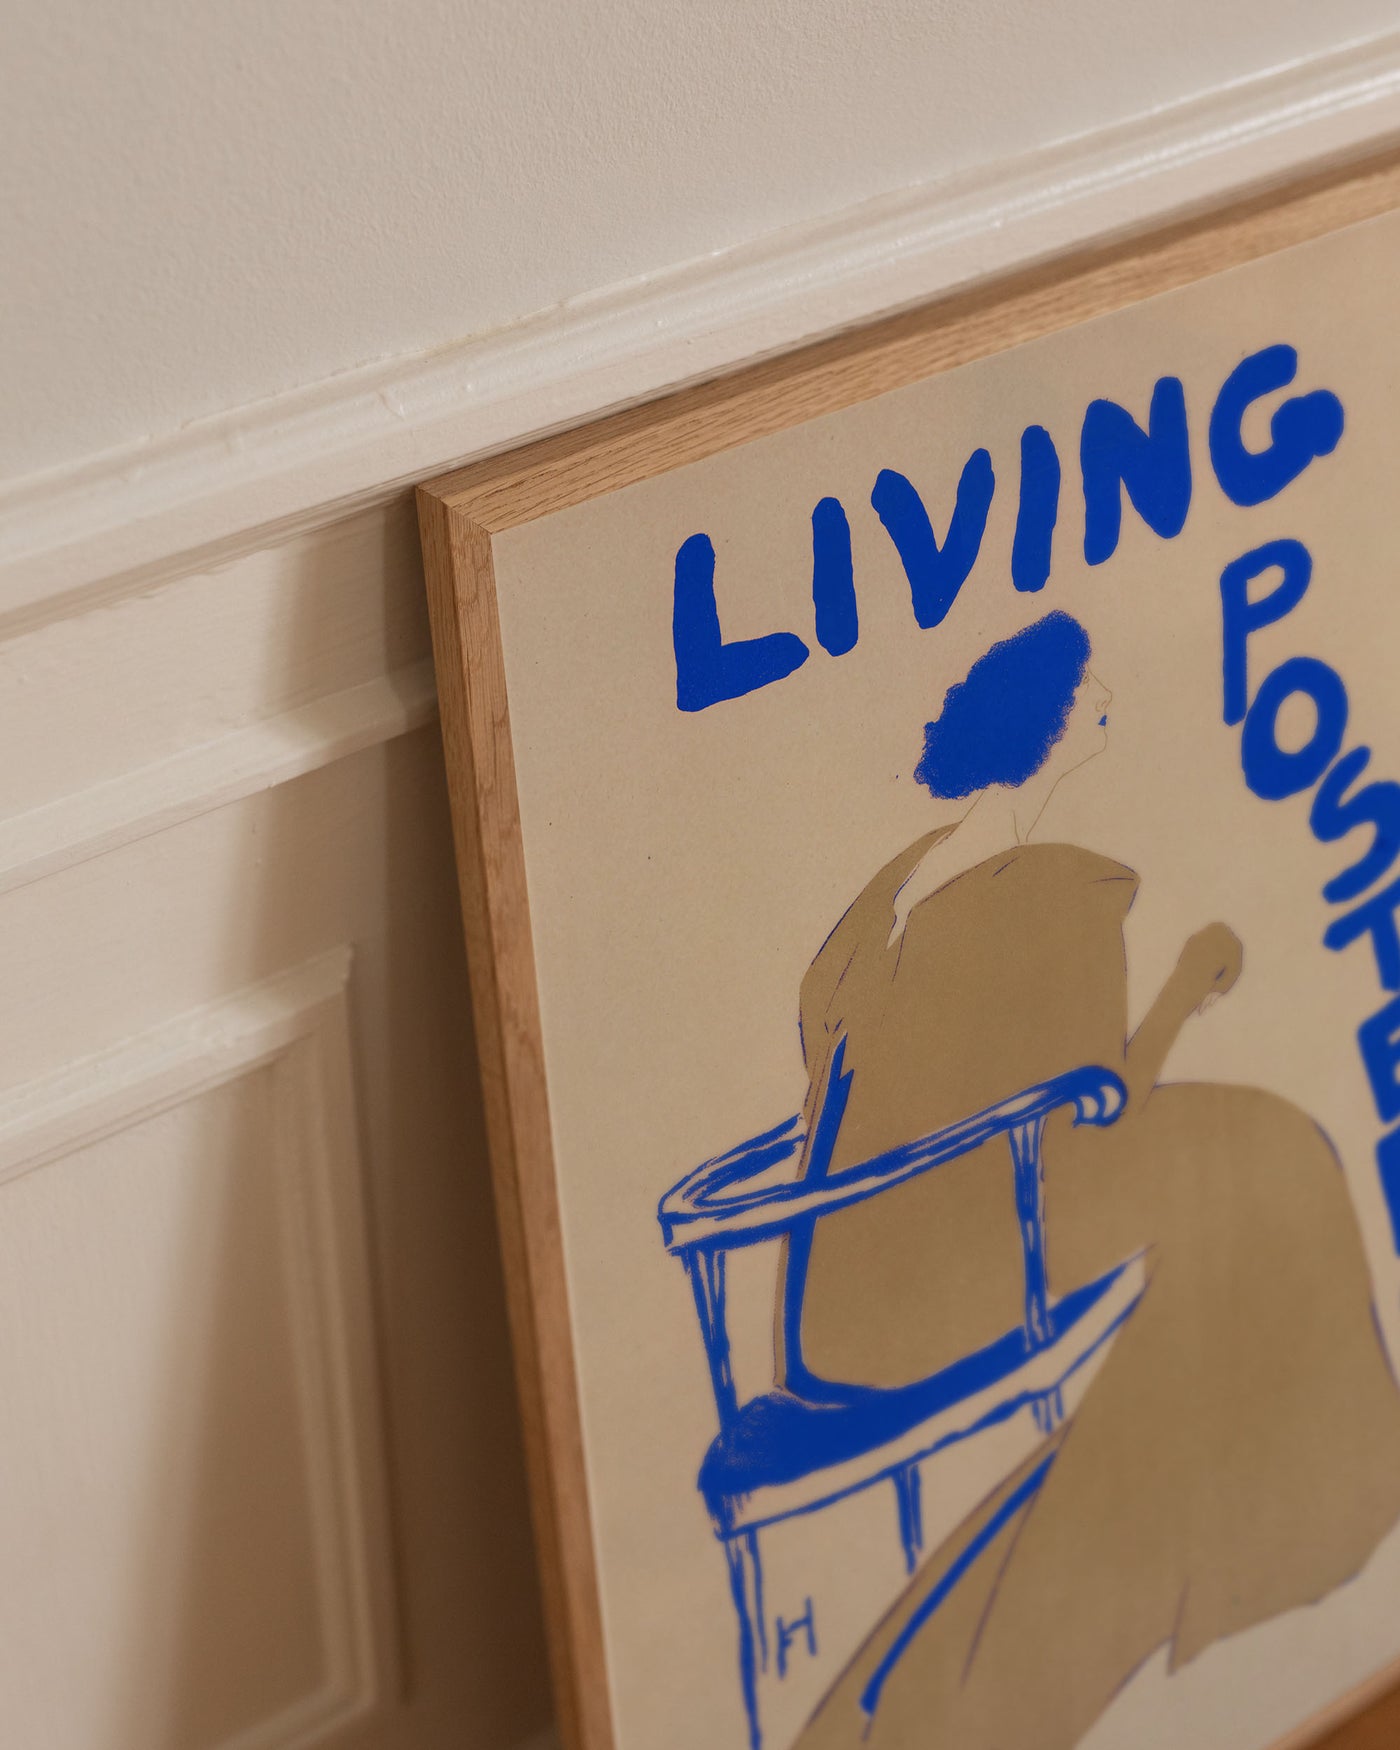 Living Posters